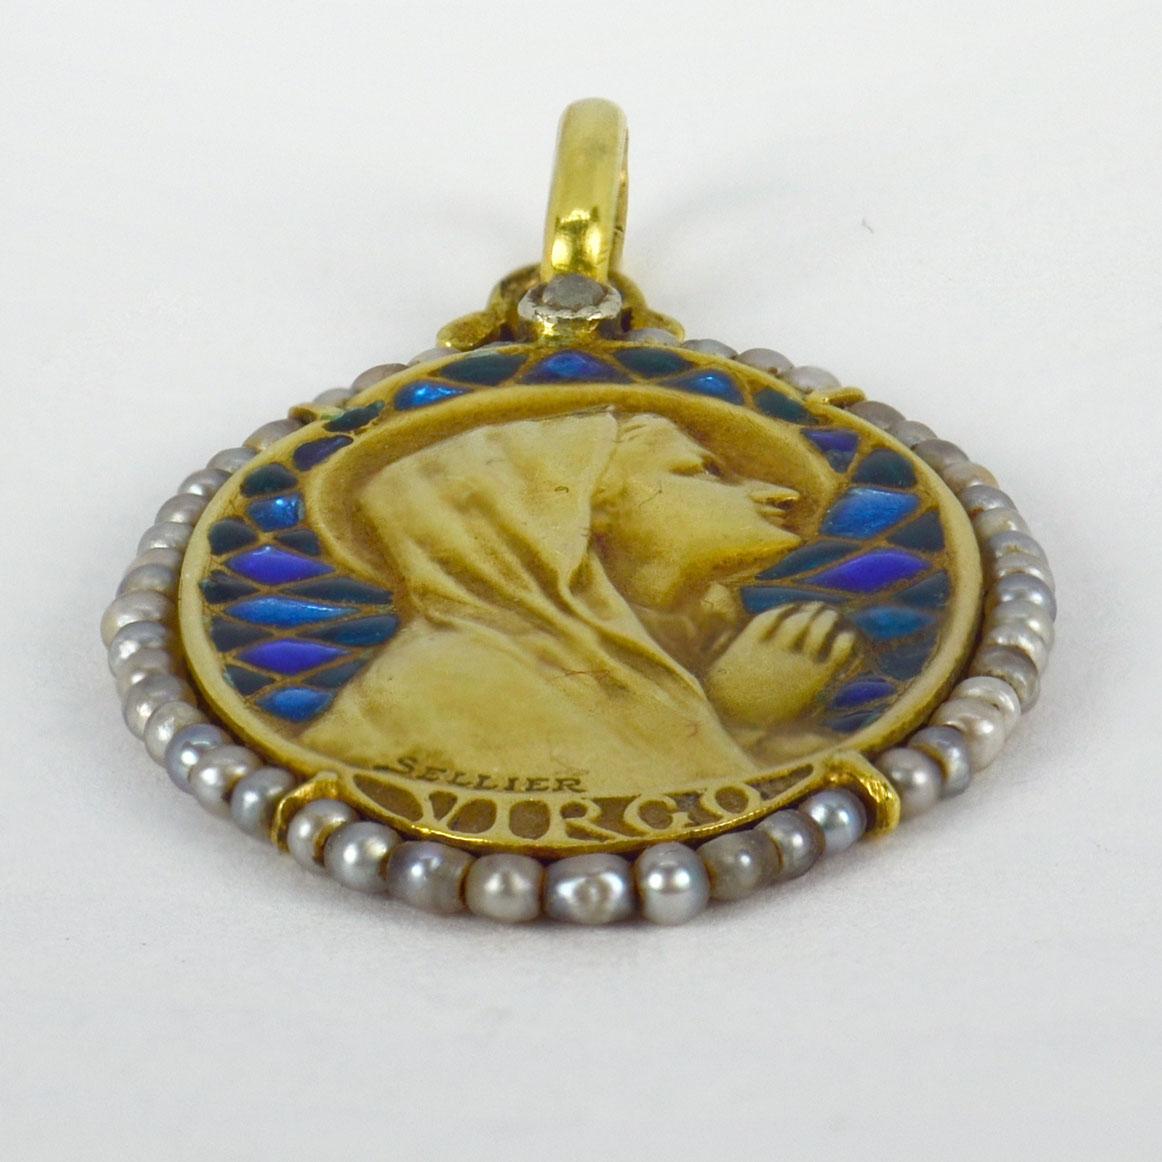 An 18 karat (18K) yellow gold pendant designed as a medal depicting the Virgin Mary with plique-a-jour enamel, a rose-cut diamond and surrounded by 48 natural seed pearls. Engraved to the reverse with a monogram of EF and the date ‘29 Jan 1945’. 